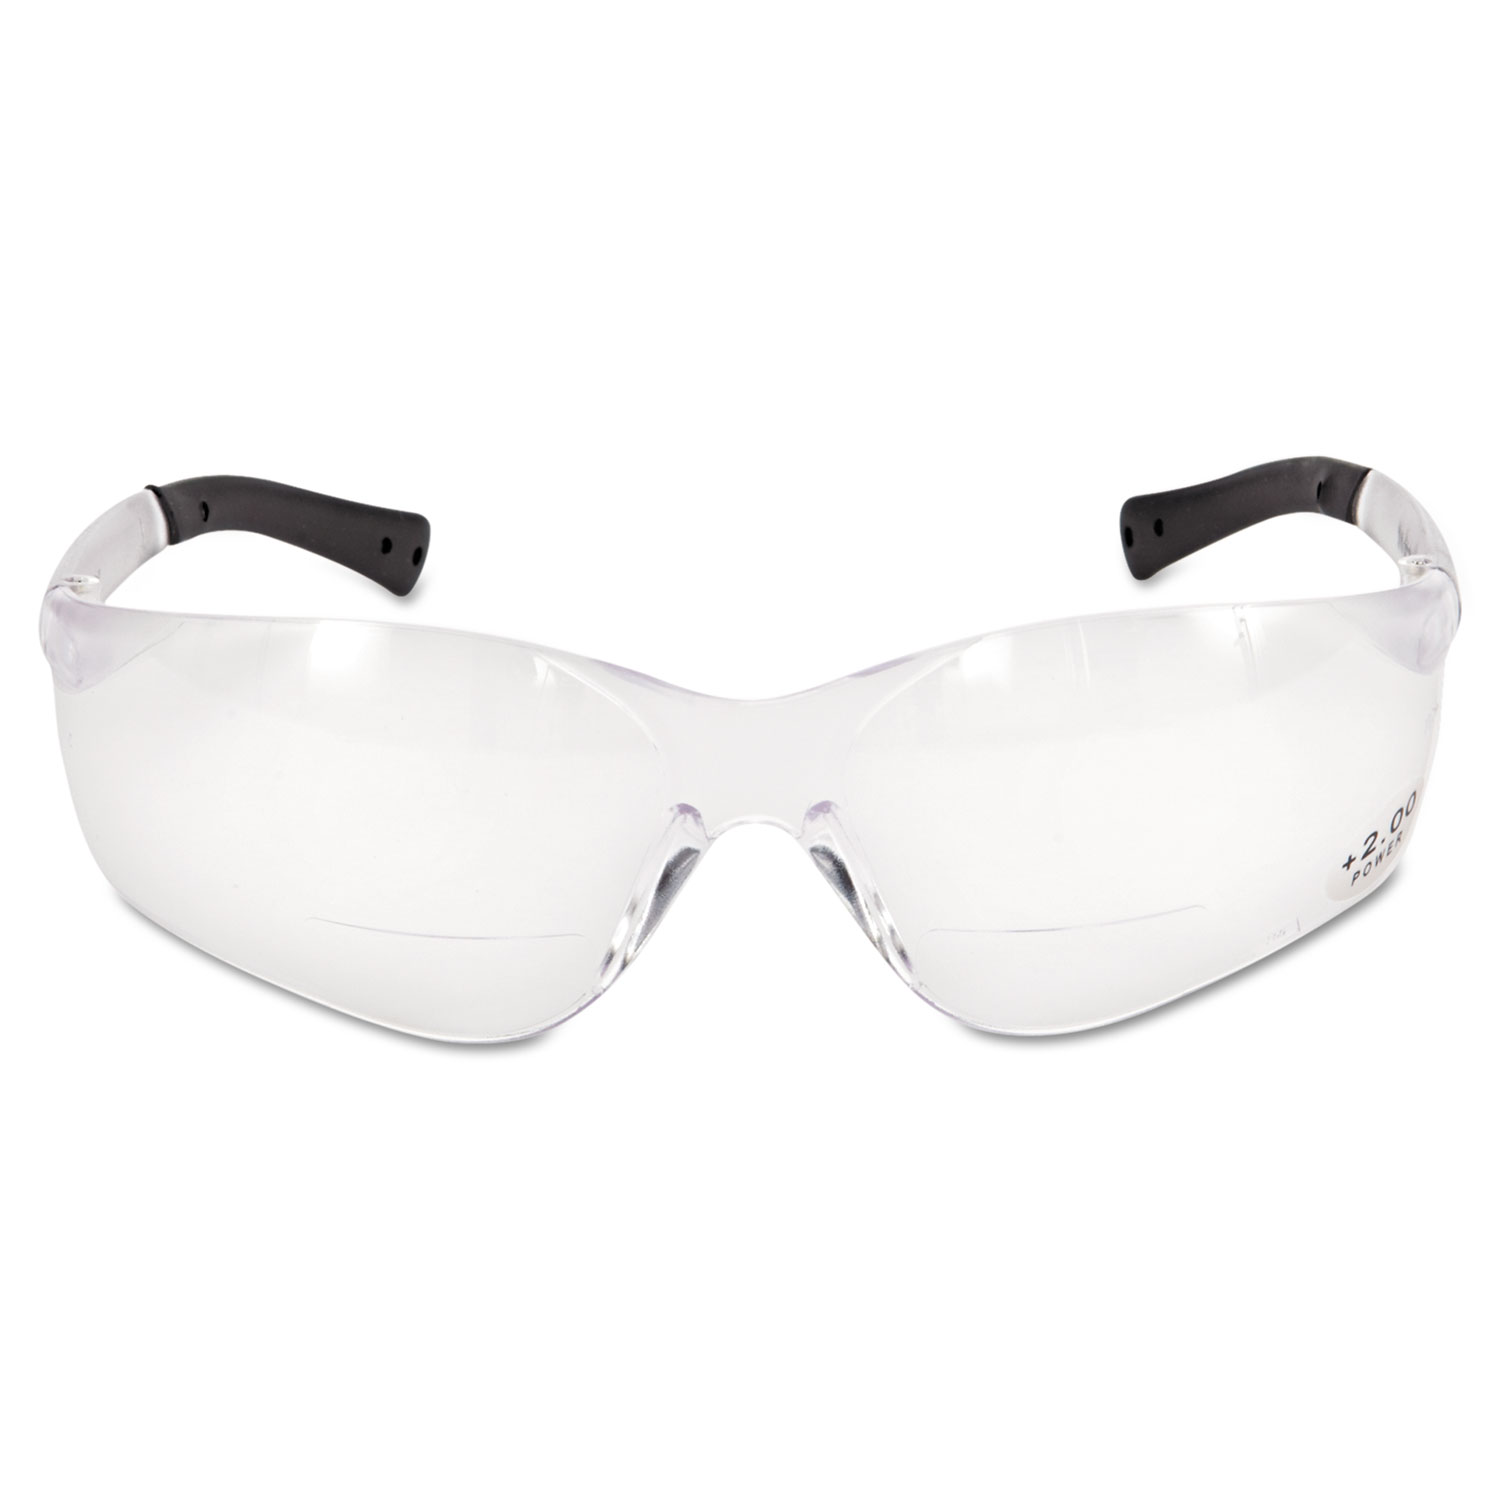 Mcr Safety Bkh20 2 0 Strength Bearkat Magnifiers Safety Glasses Clear Lens